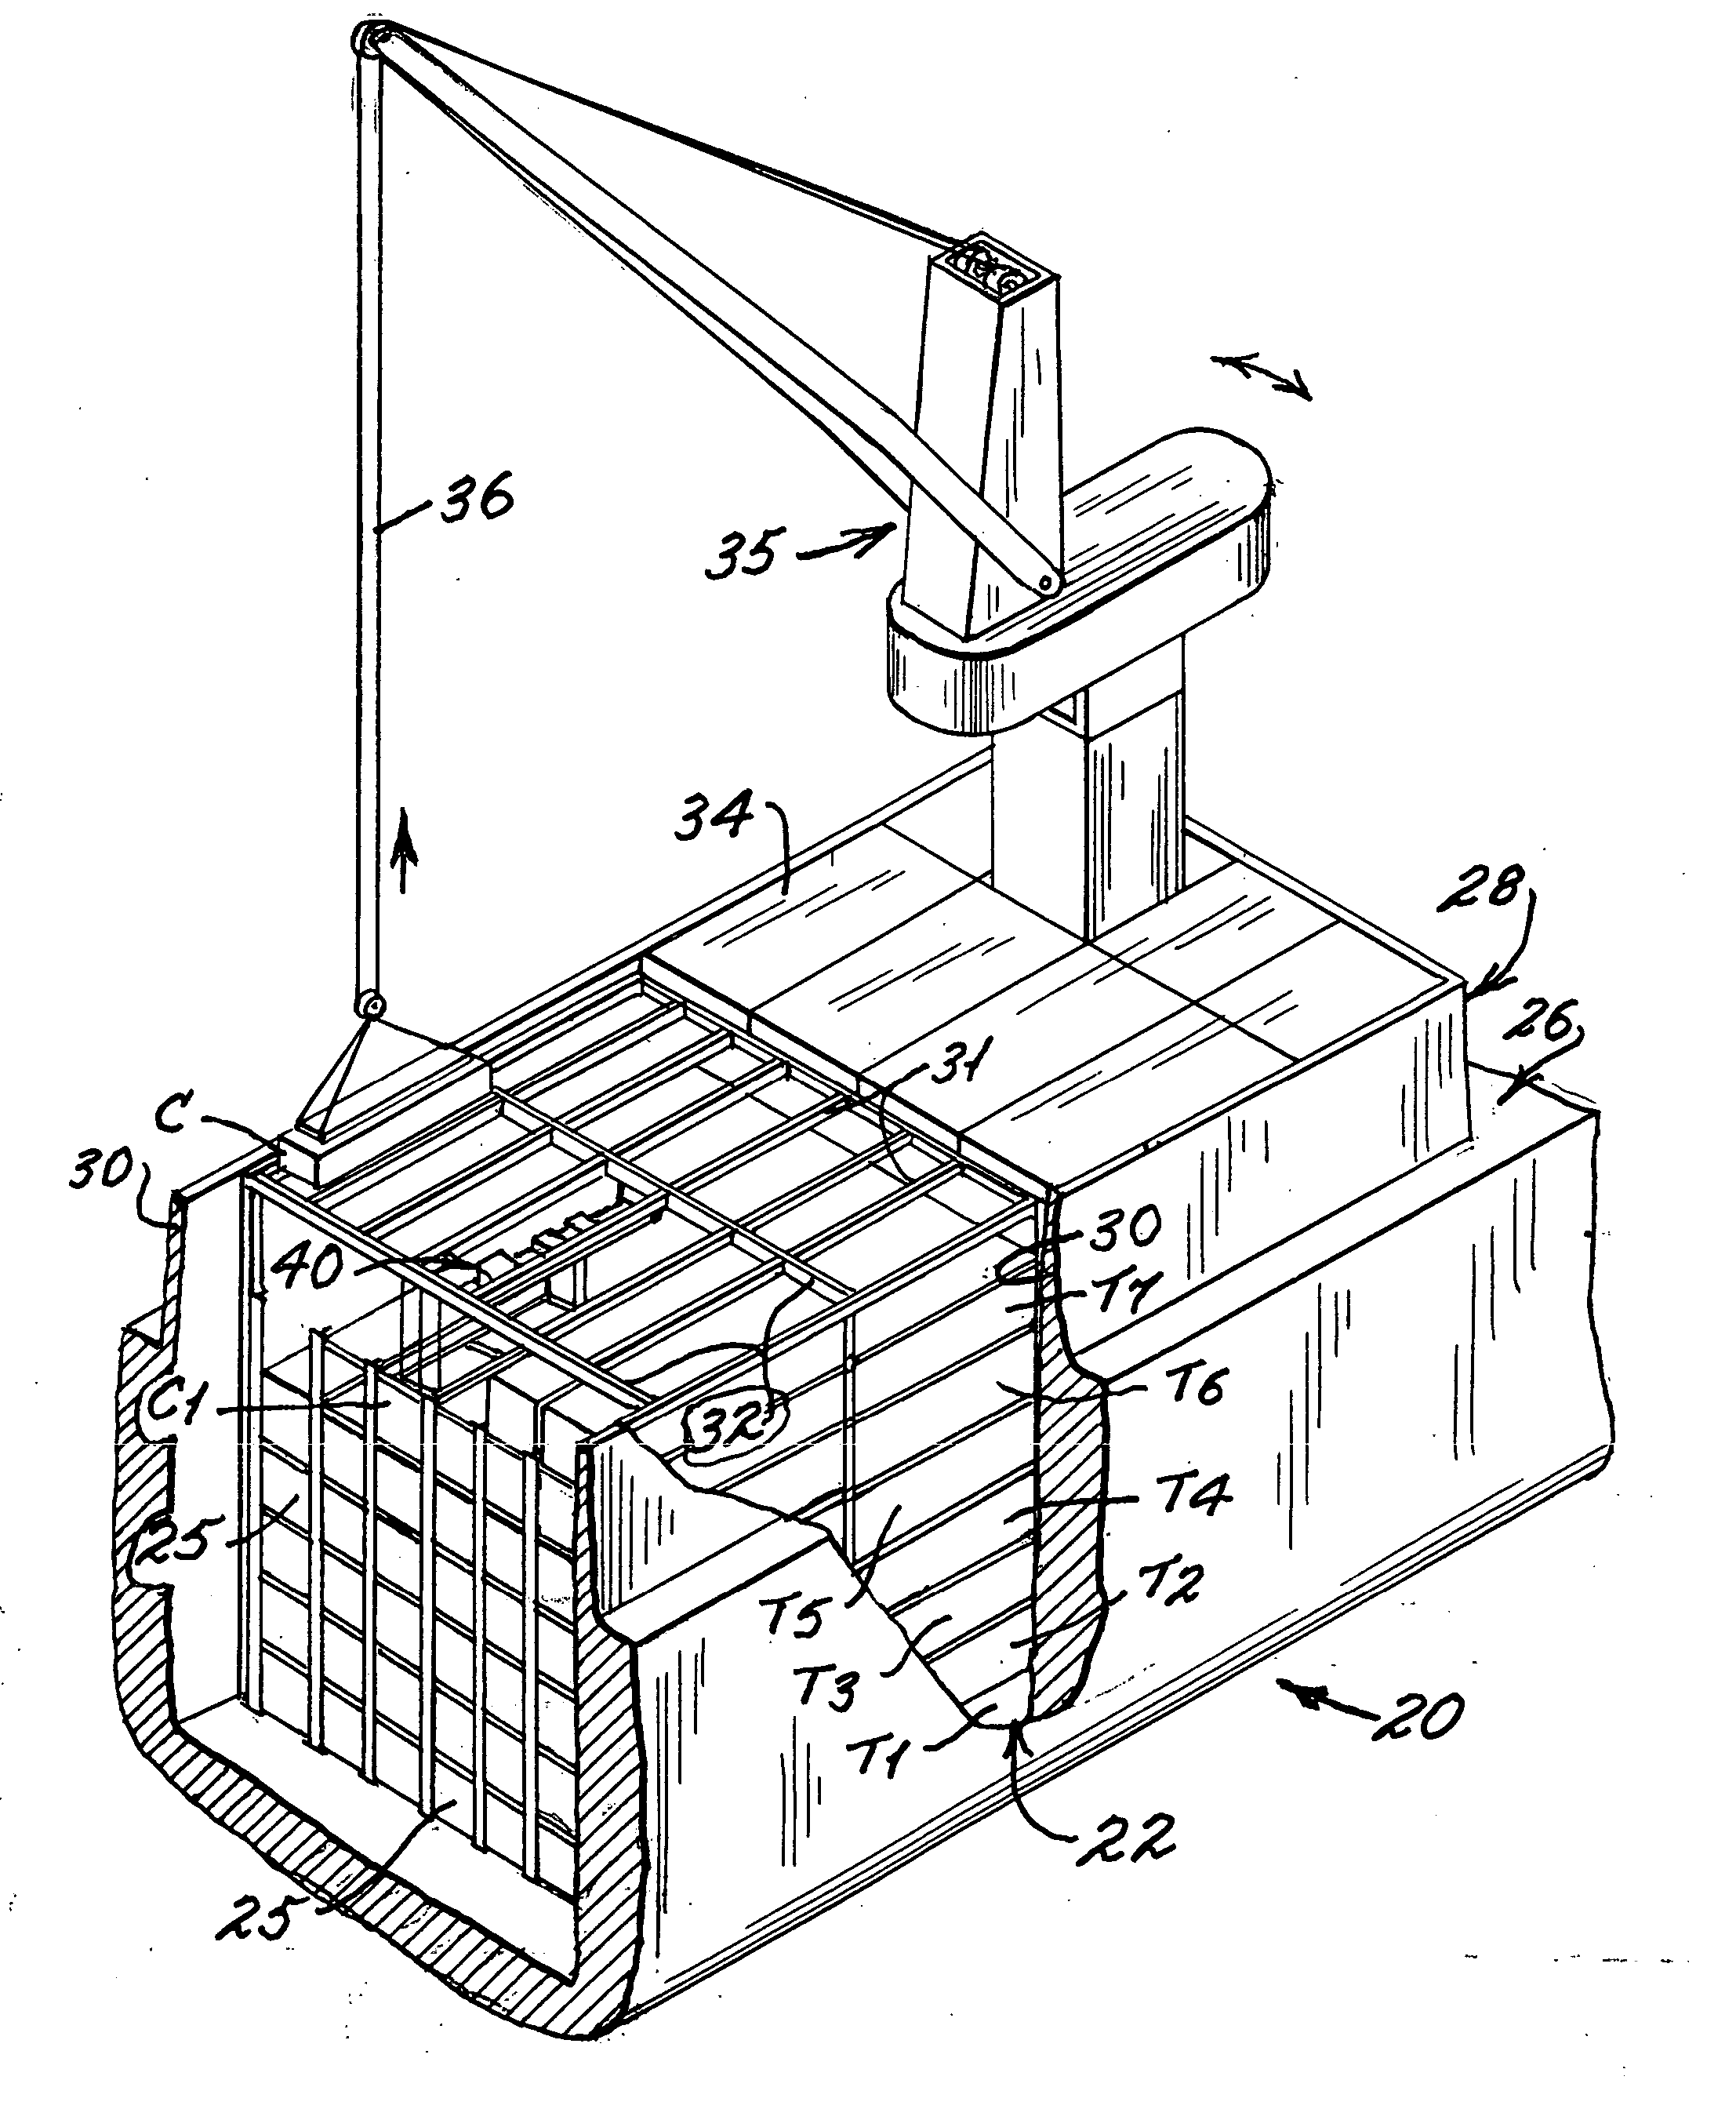 Automated shipboard material handling and storage system